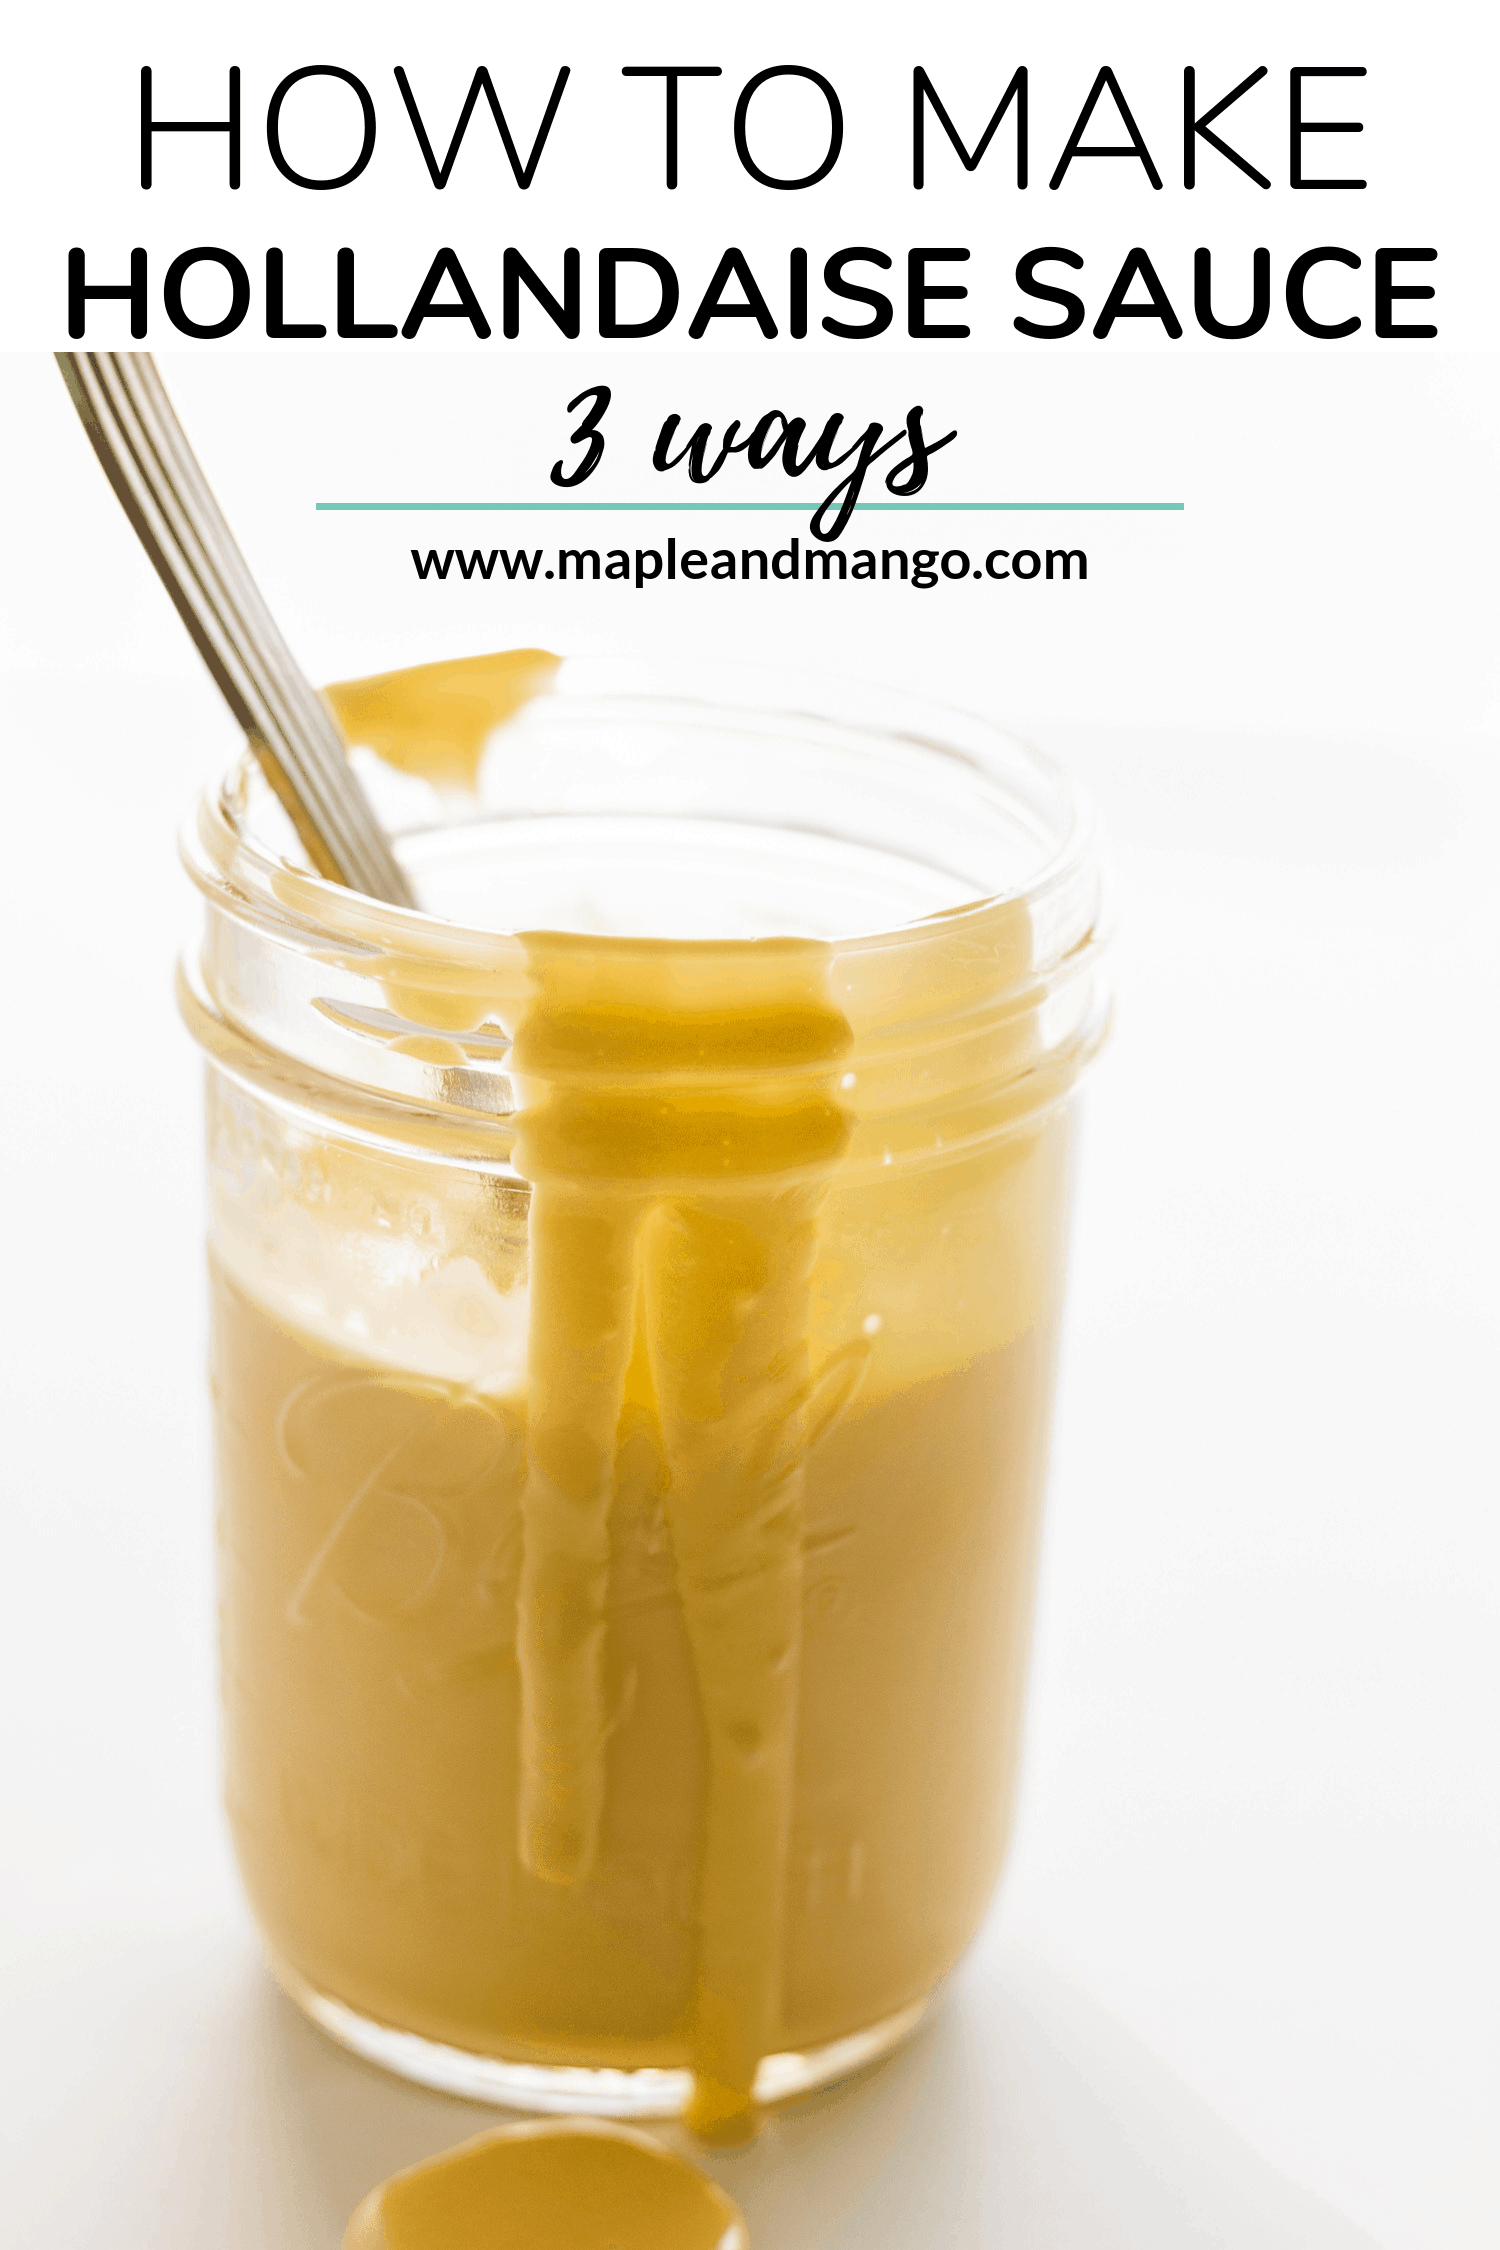 mason jar filled with hollandaise sauce and a spoon sitting inside